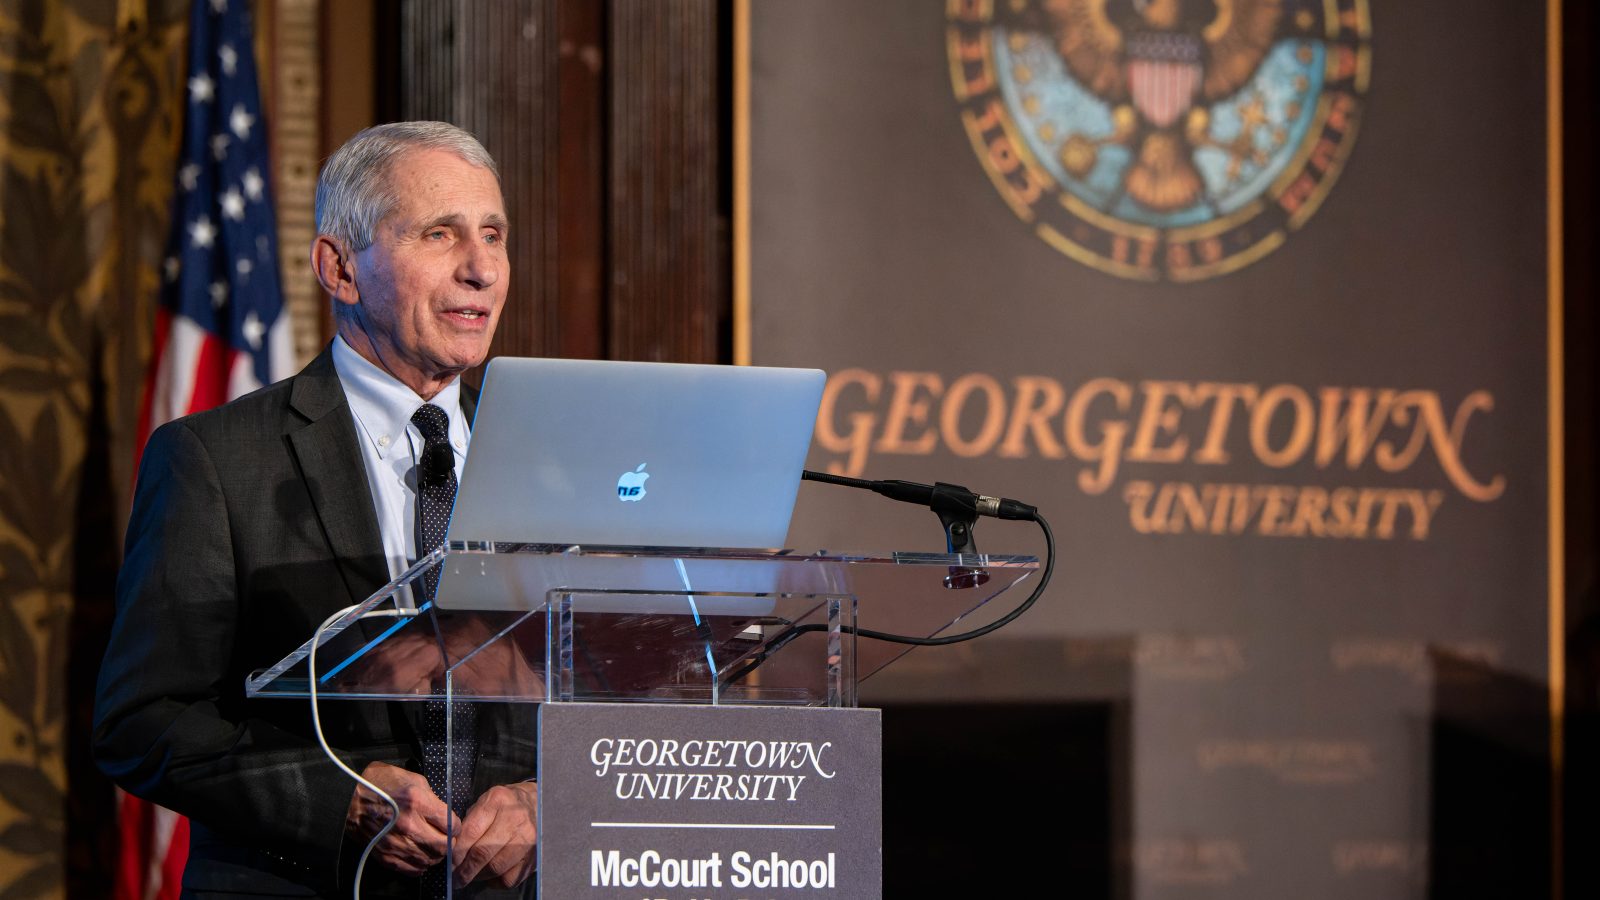 Dr. Fauci delivers Whittington Lecture in historic Gaston Hall